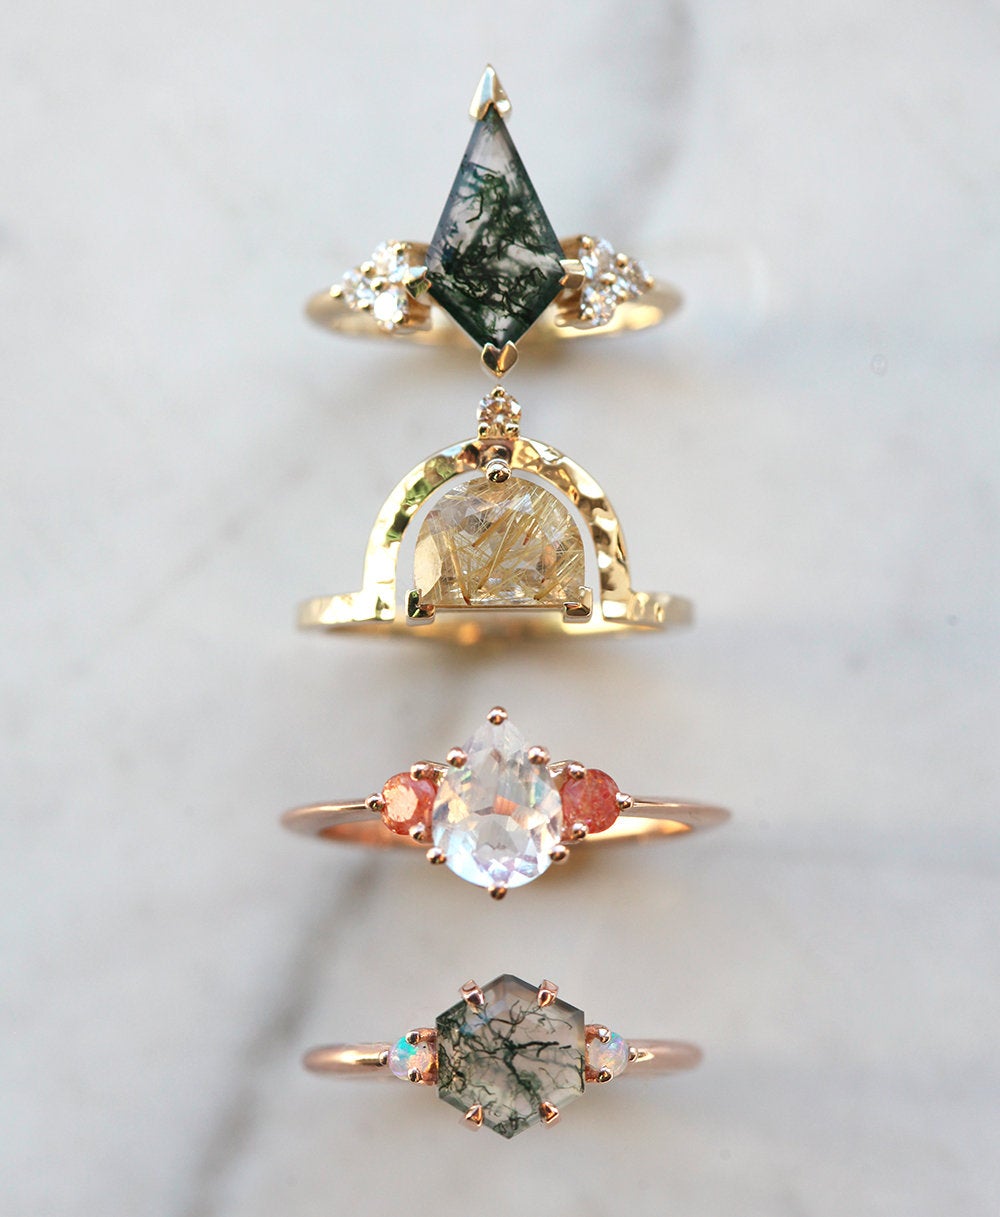 Half-moon-shaped golden rutile quartz ring with champagne diamond and other rings